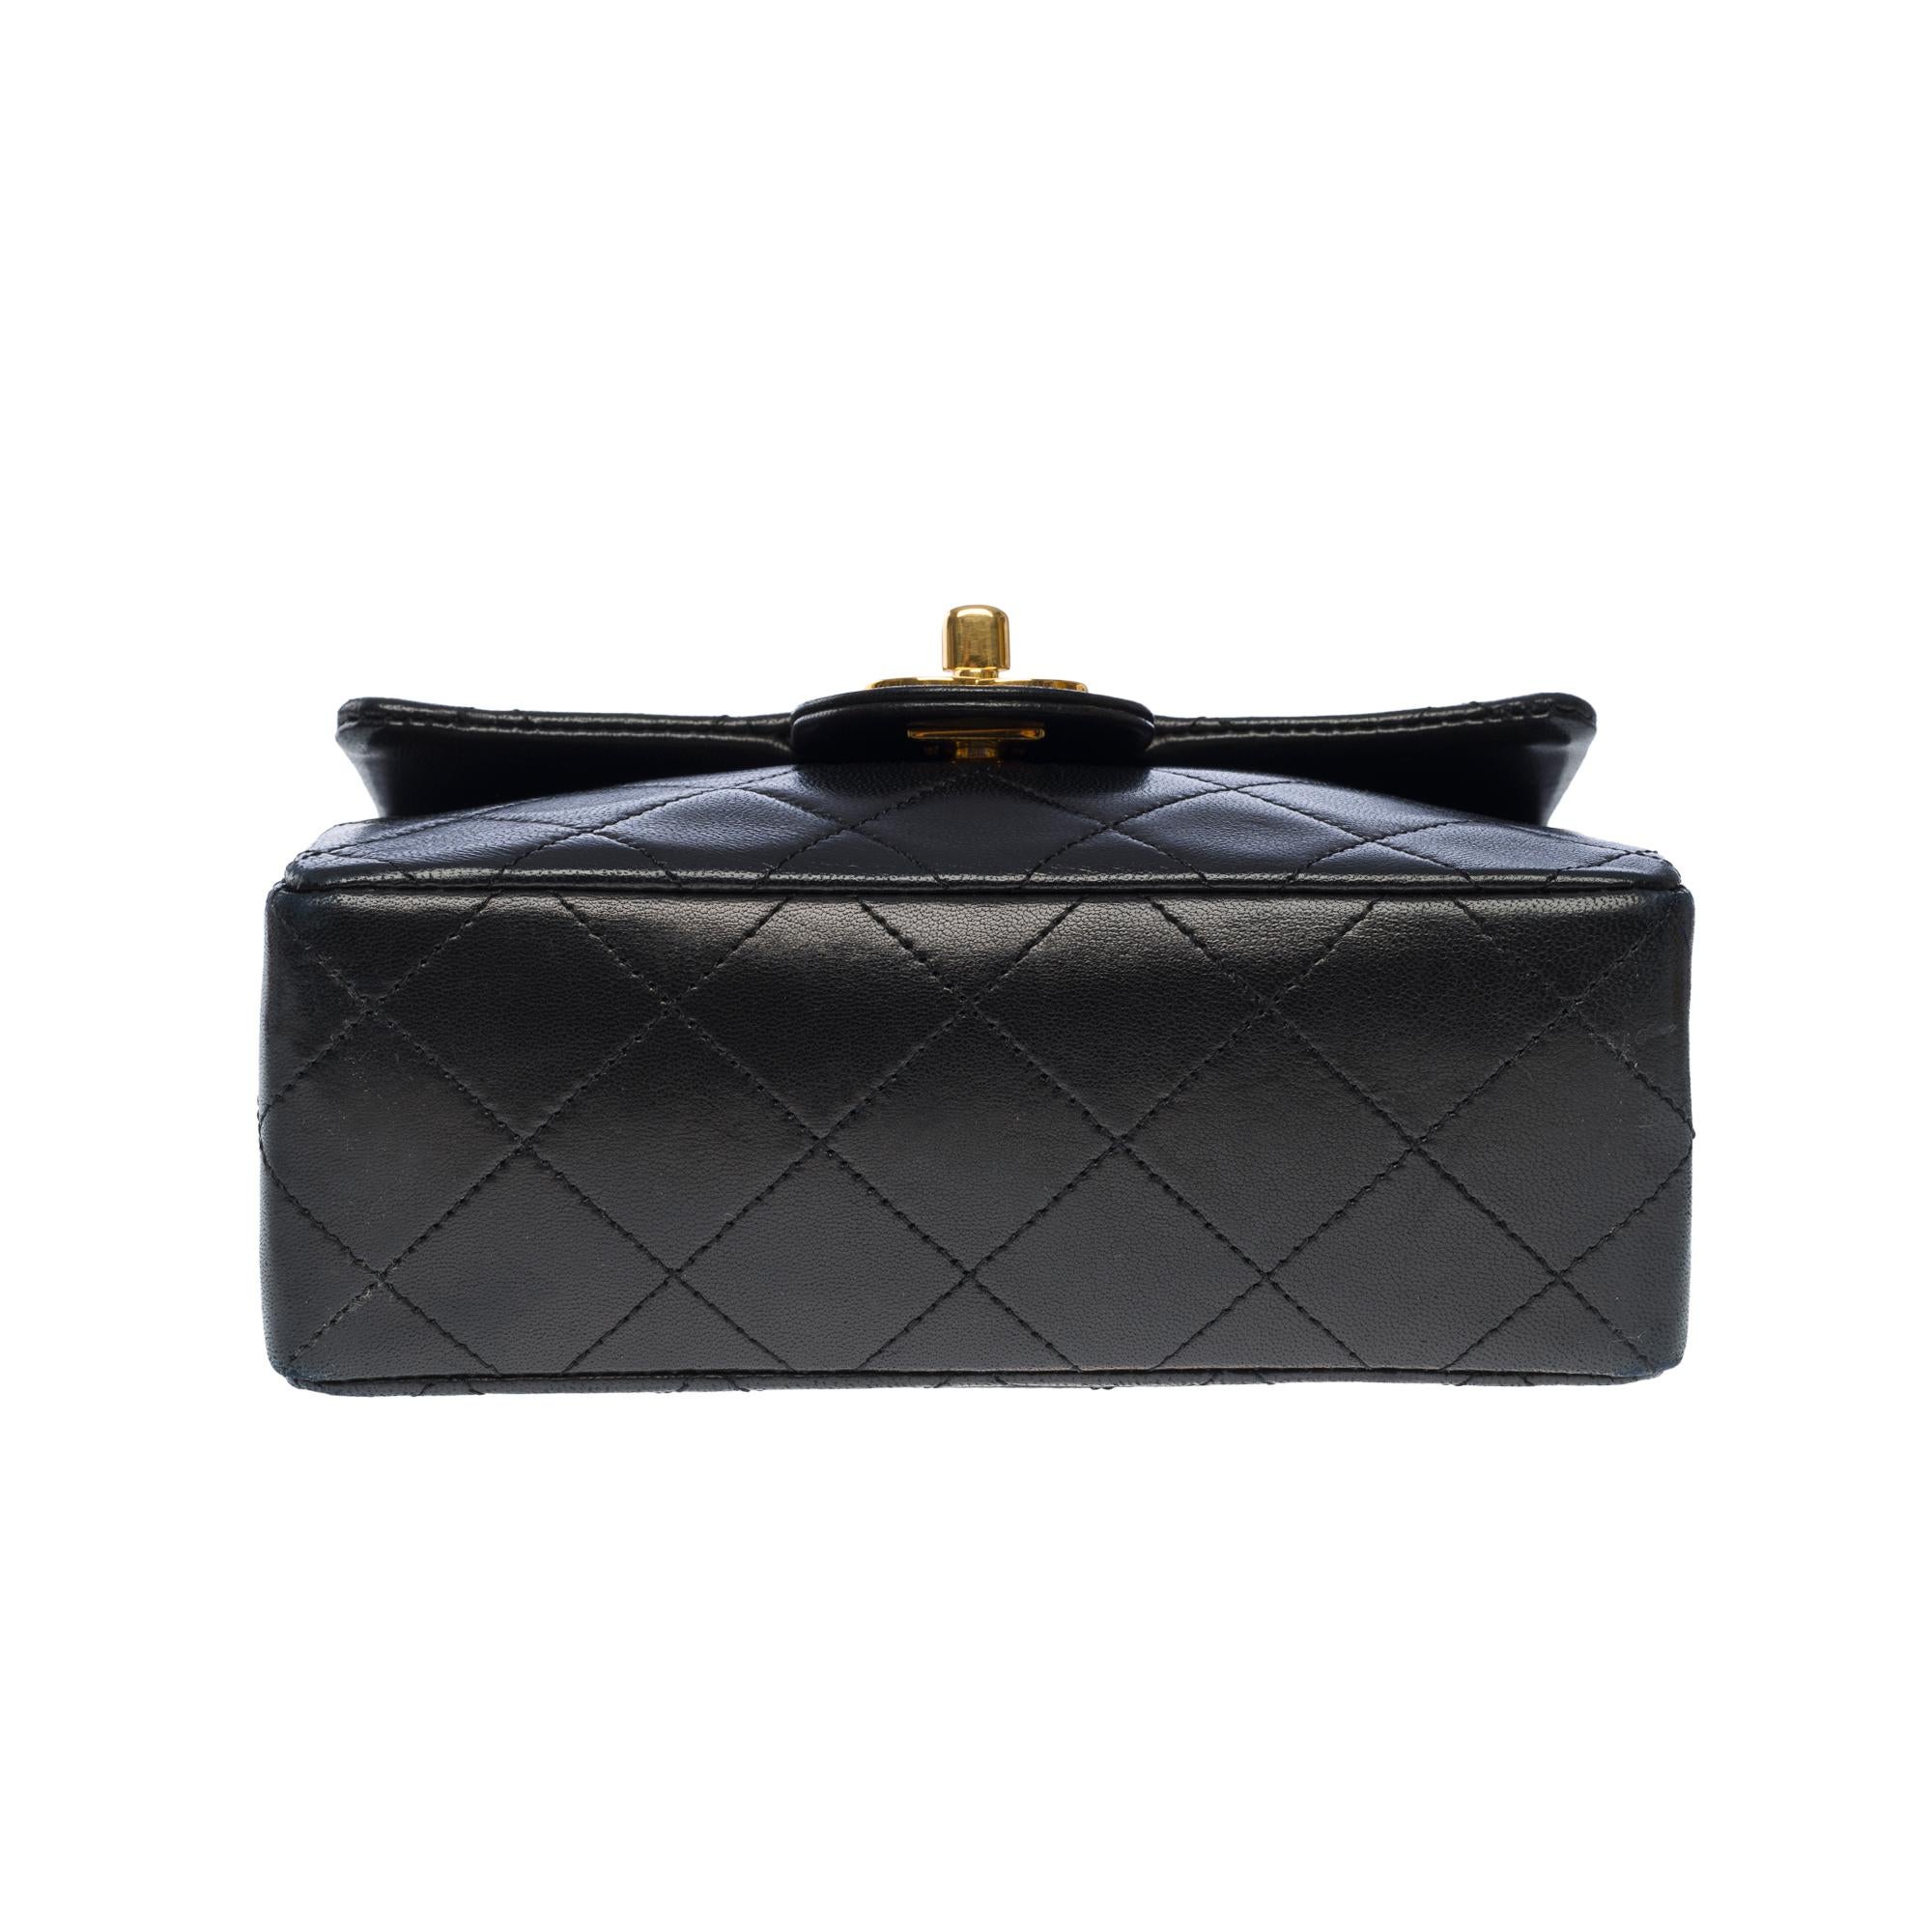 Chanel Timeless Mini Square shoulder Flap bag in black quilted lambskin, GHW 6